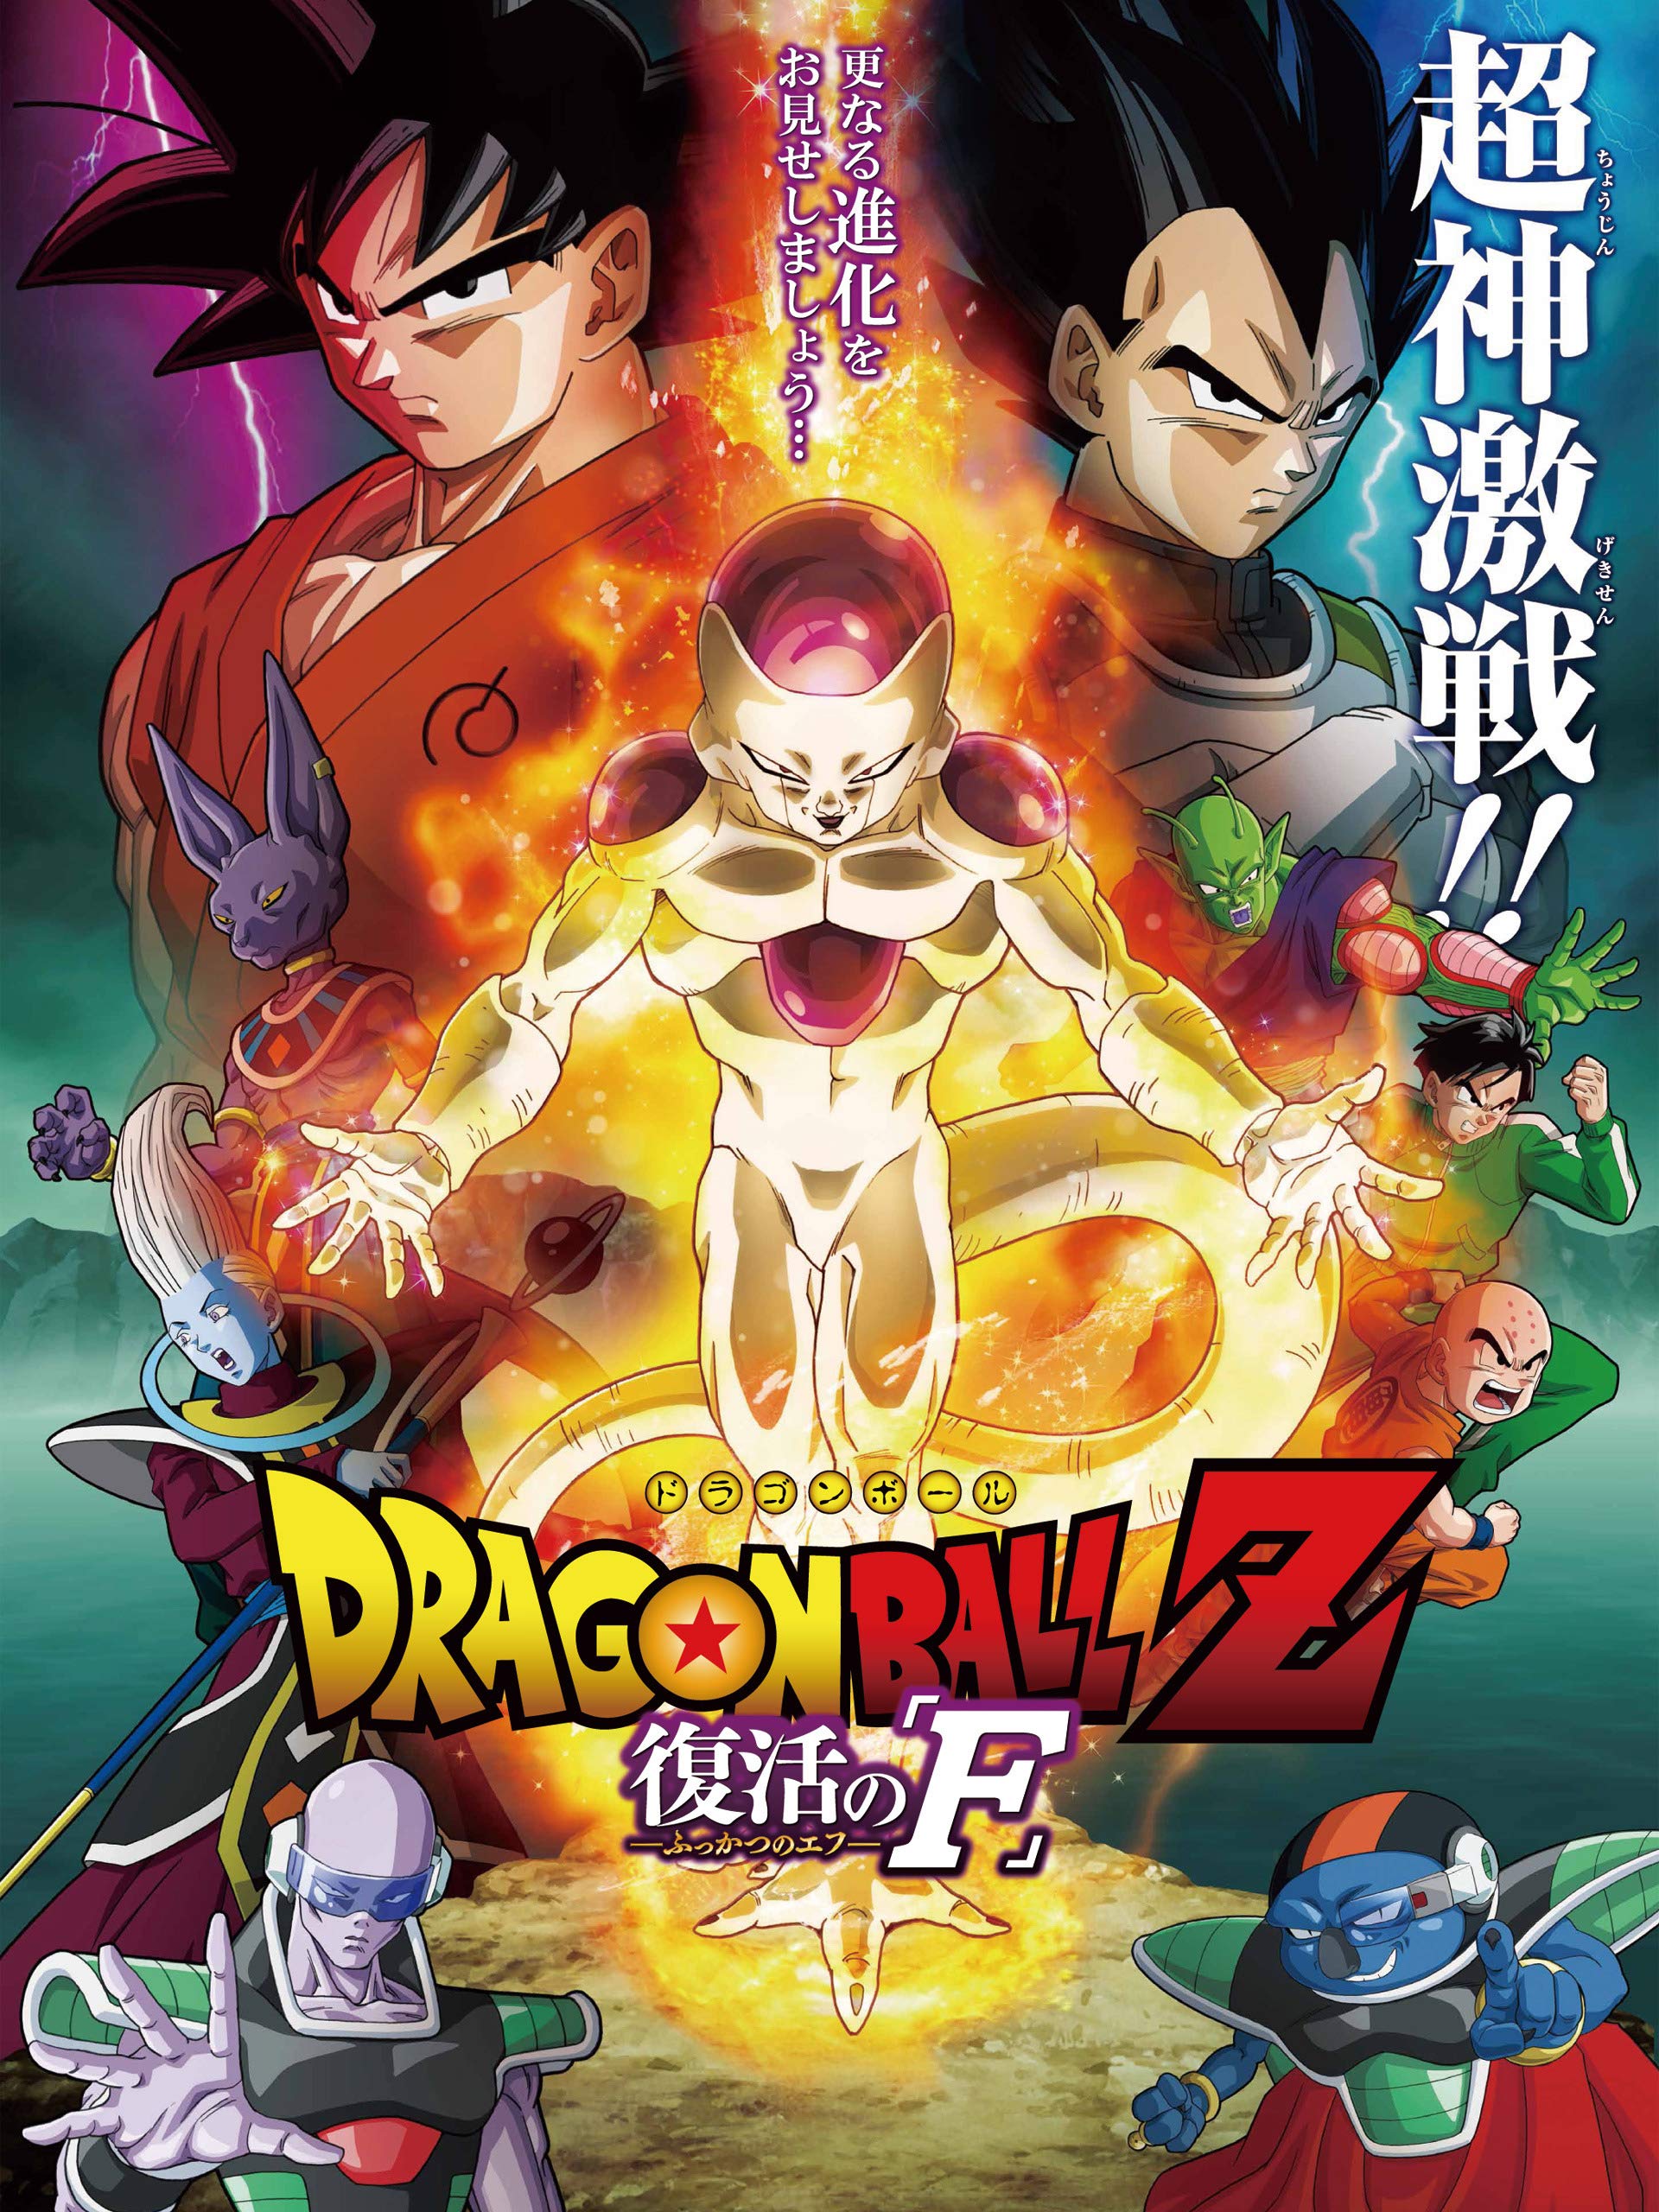 arturo olivares recommends Dragon Ball Z Movies Free Download